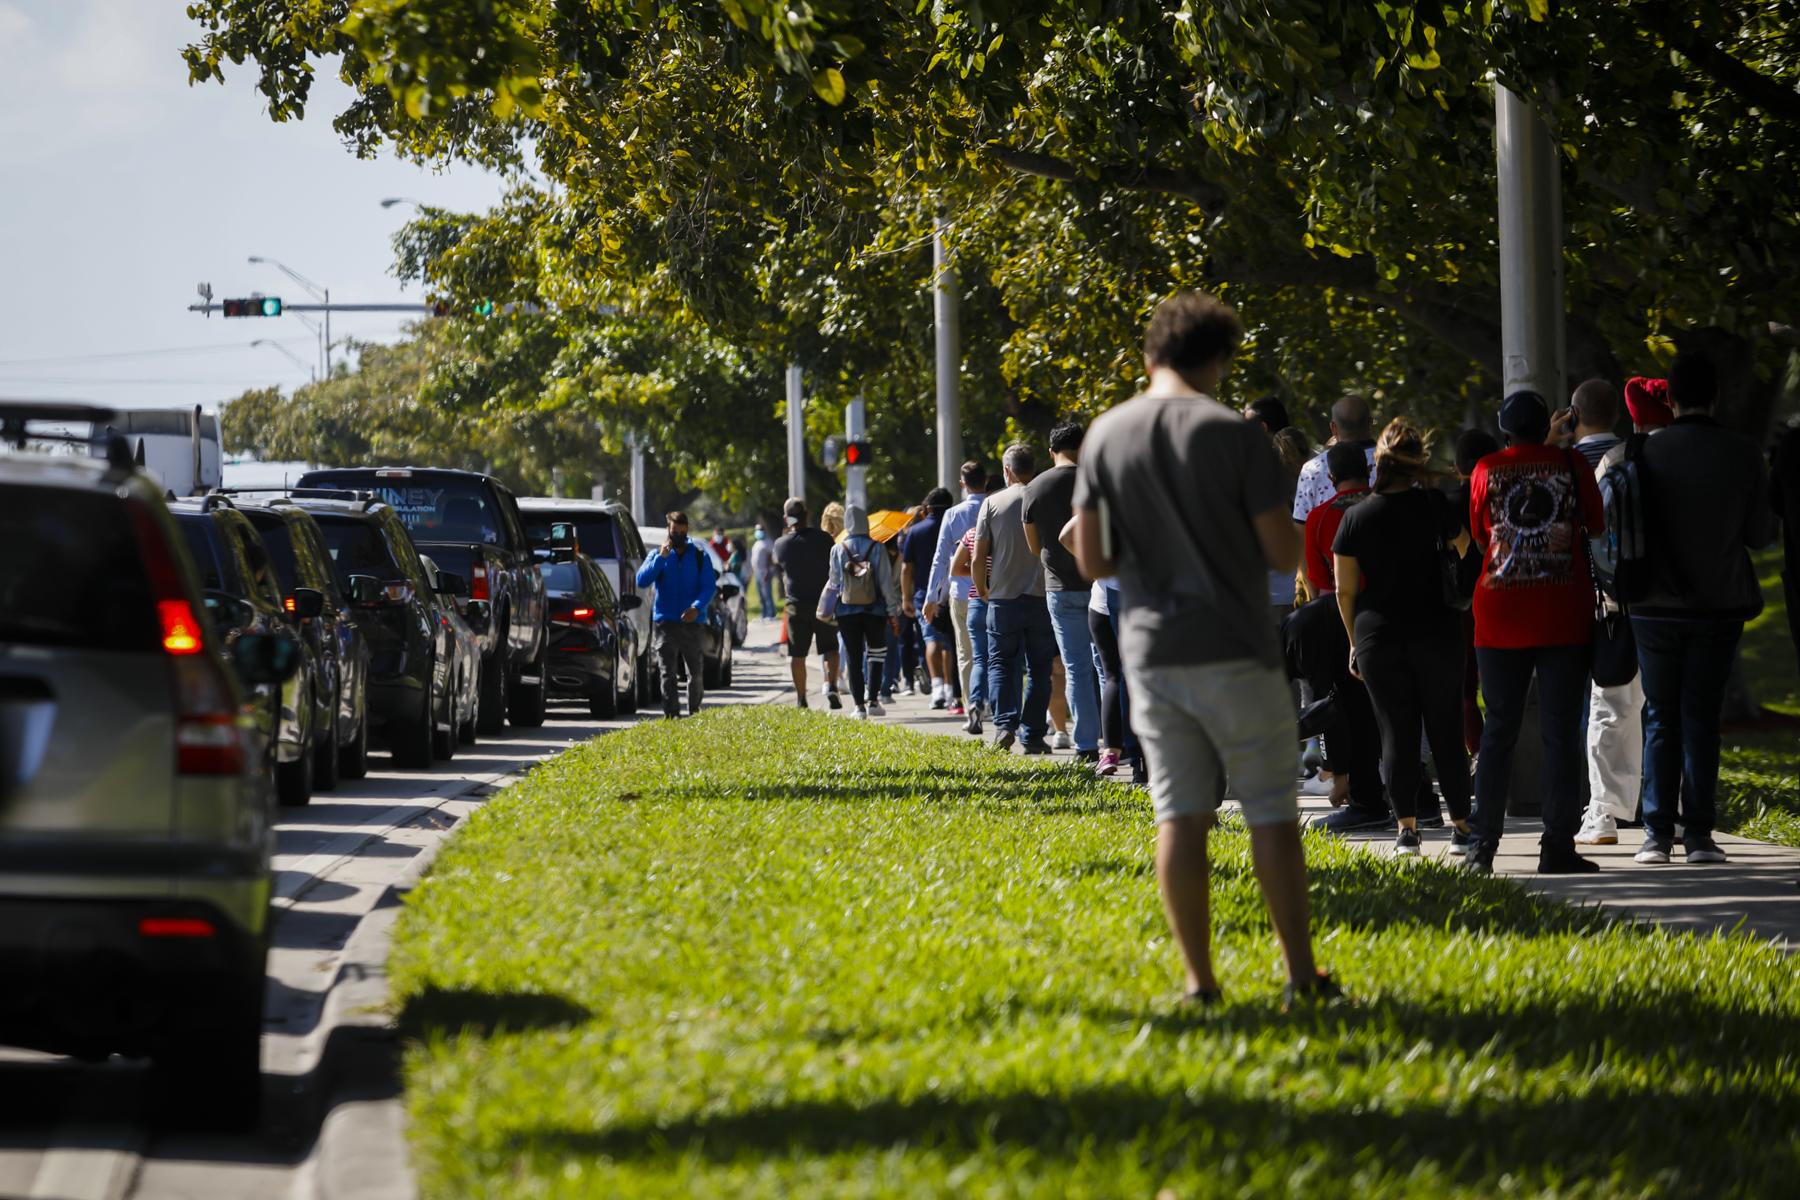 FEMA vaccination facility in North Miami - People wait in line to get the COVID-19 vaccine in a...